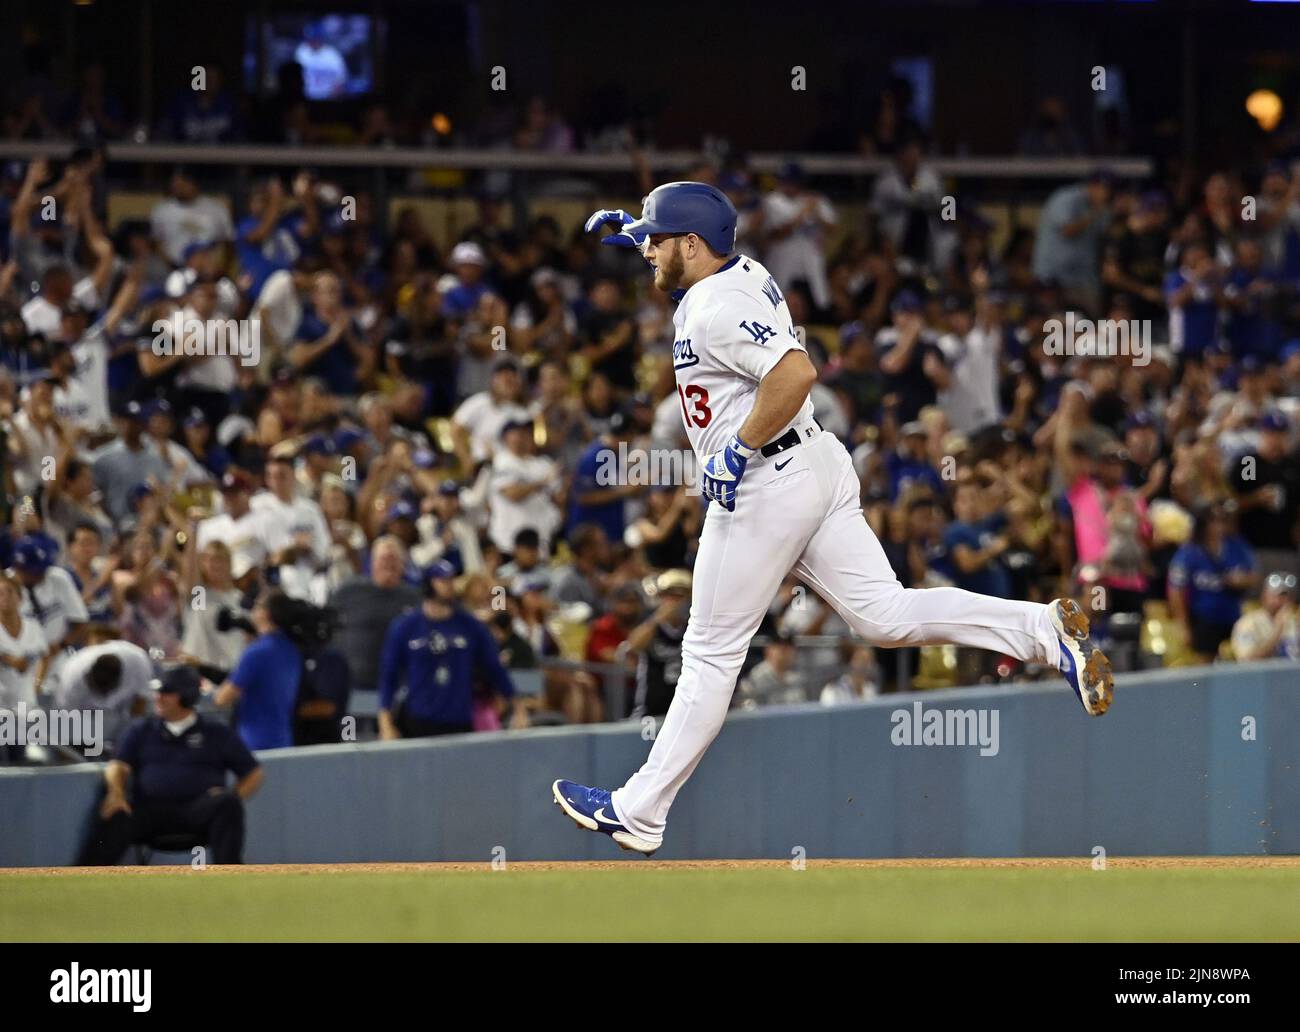 Los Angeles, United States. 10th Aug, 2022. Los Angeles Dodgers Max Muncy rounds the bases after hitting a solo home run to right center off Minnesota Twins starting pitcher Joe Ryan during the fourth inning at Dodger Stadium on Tuesday, August 9, 2022. Photo by Jim Ruymen/UPI Credit: UPI/Alamy Live News Stock Photo